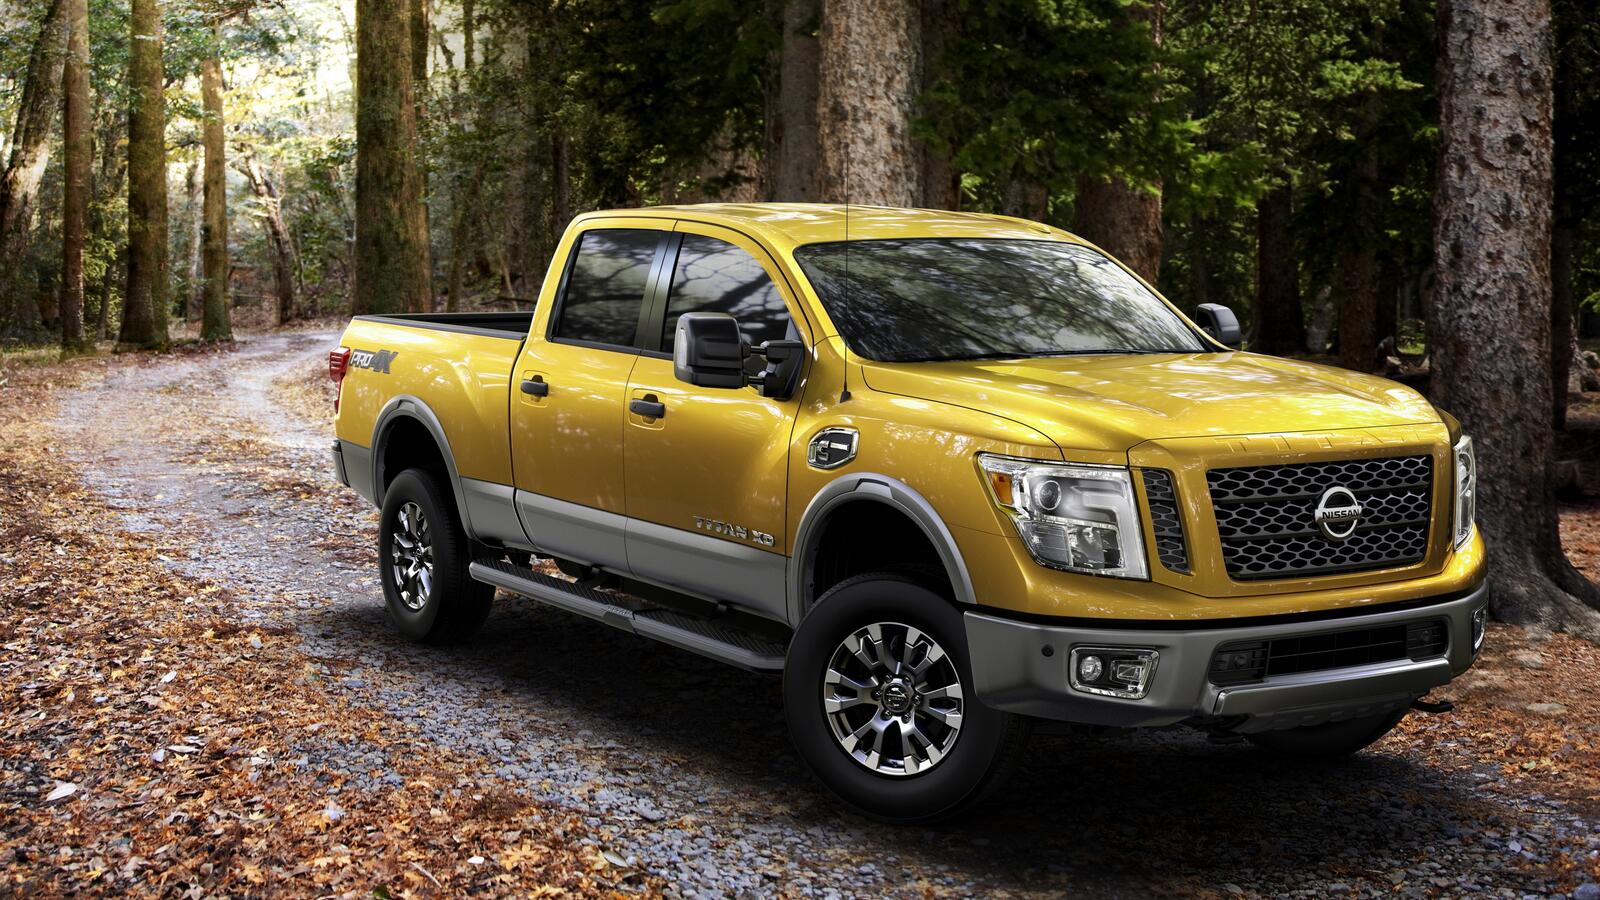 Wallpapers Nissan pickup yellow on the desktop